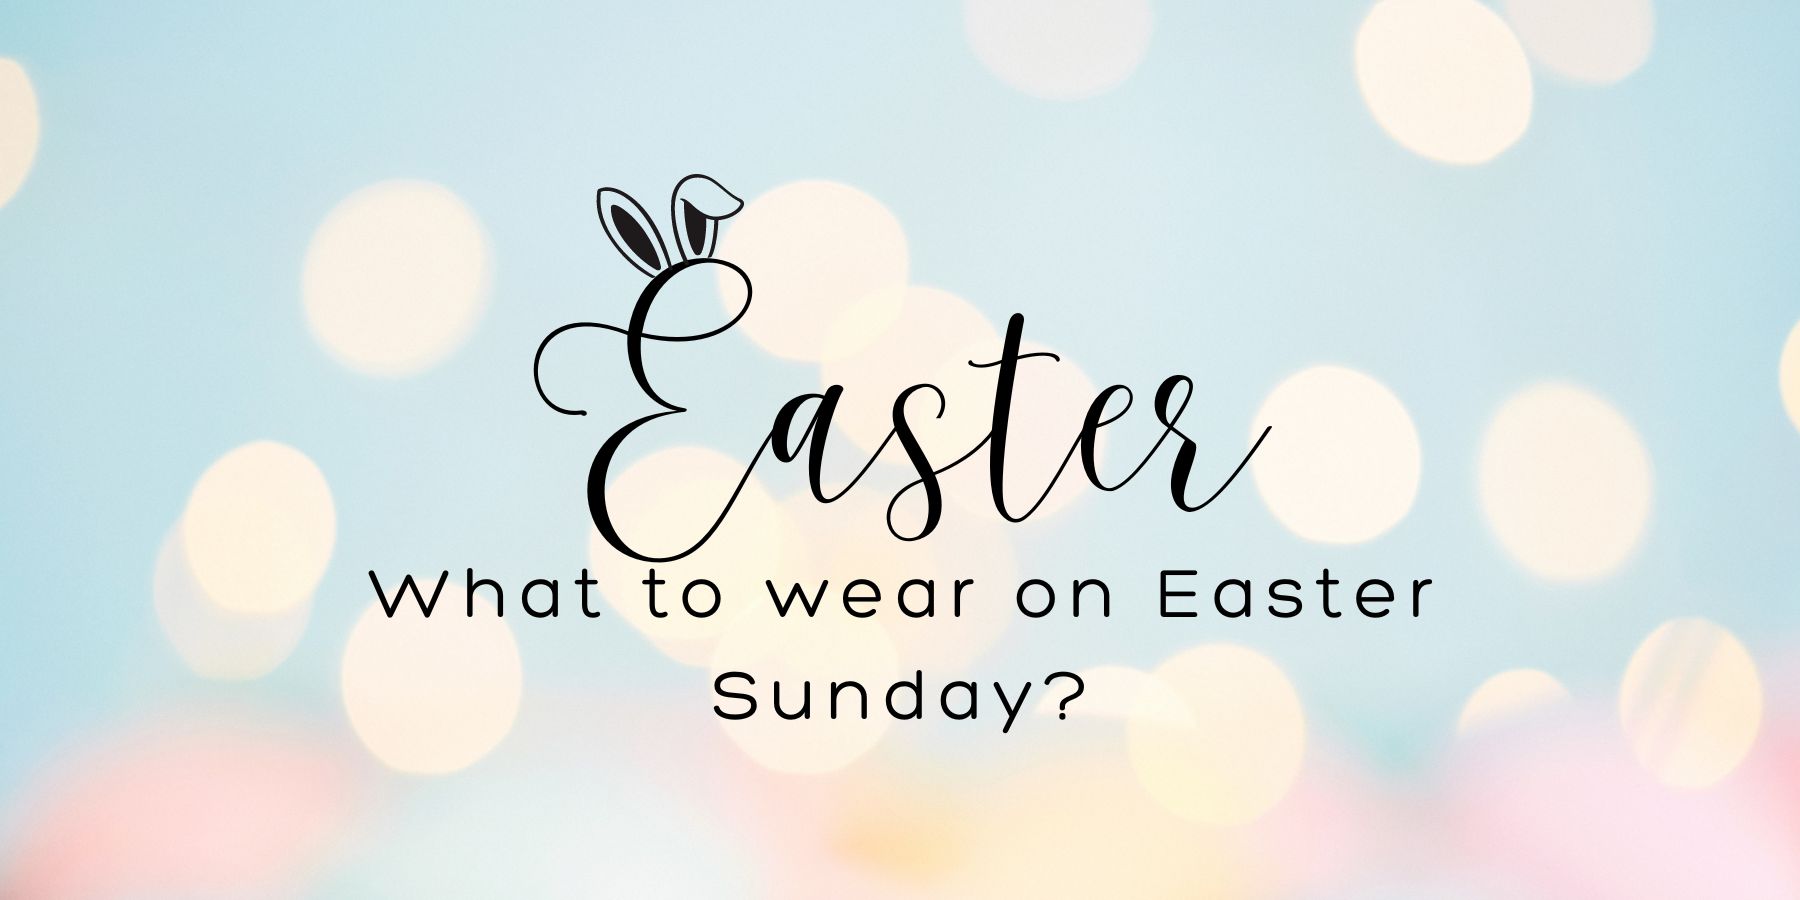 Easter Outfits for Women & Men : Dressing Fashionably this Easter Sunday